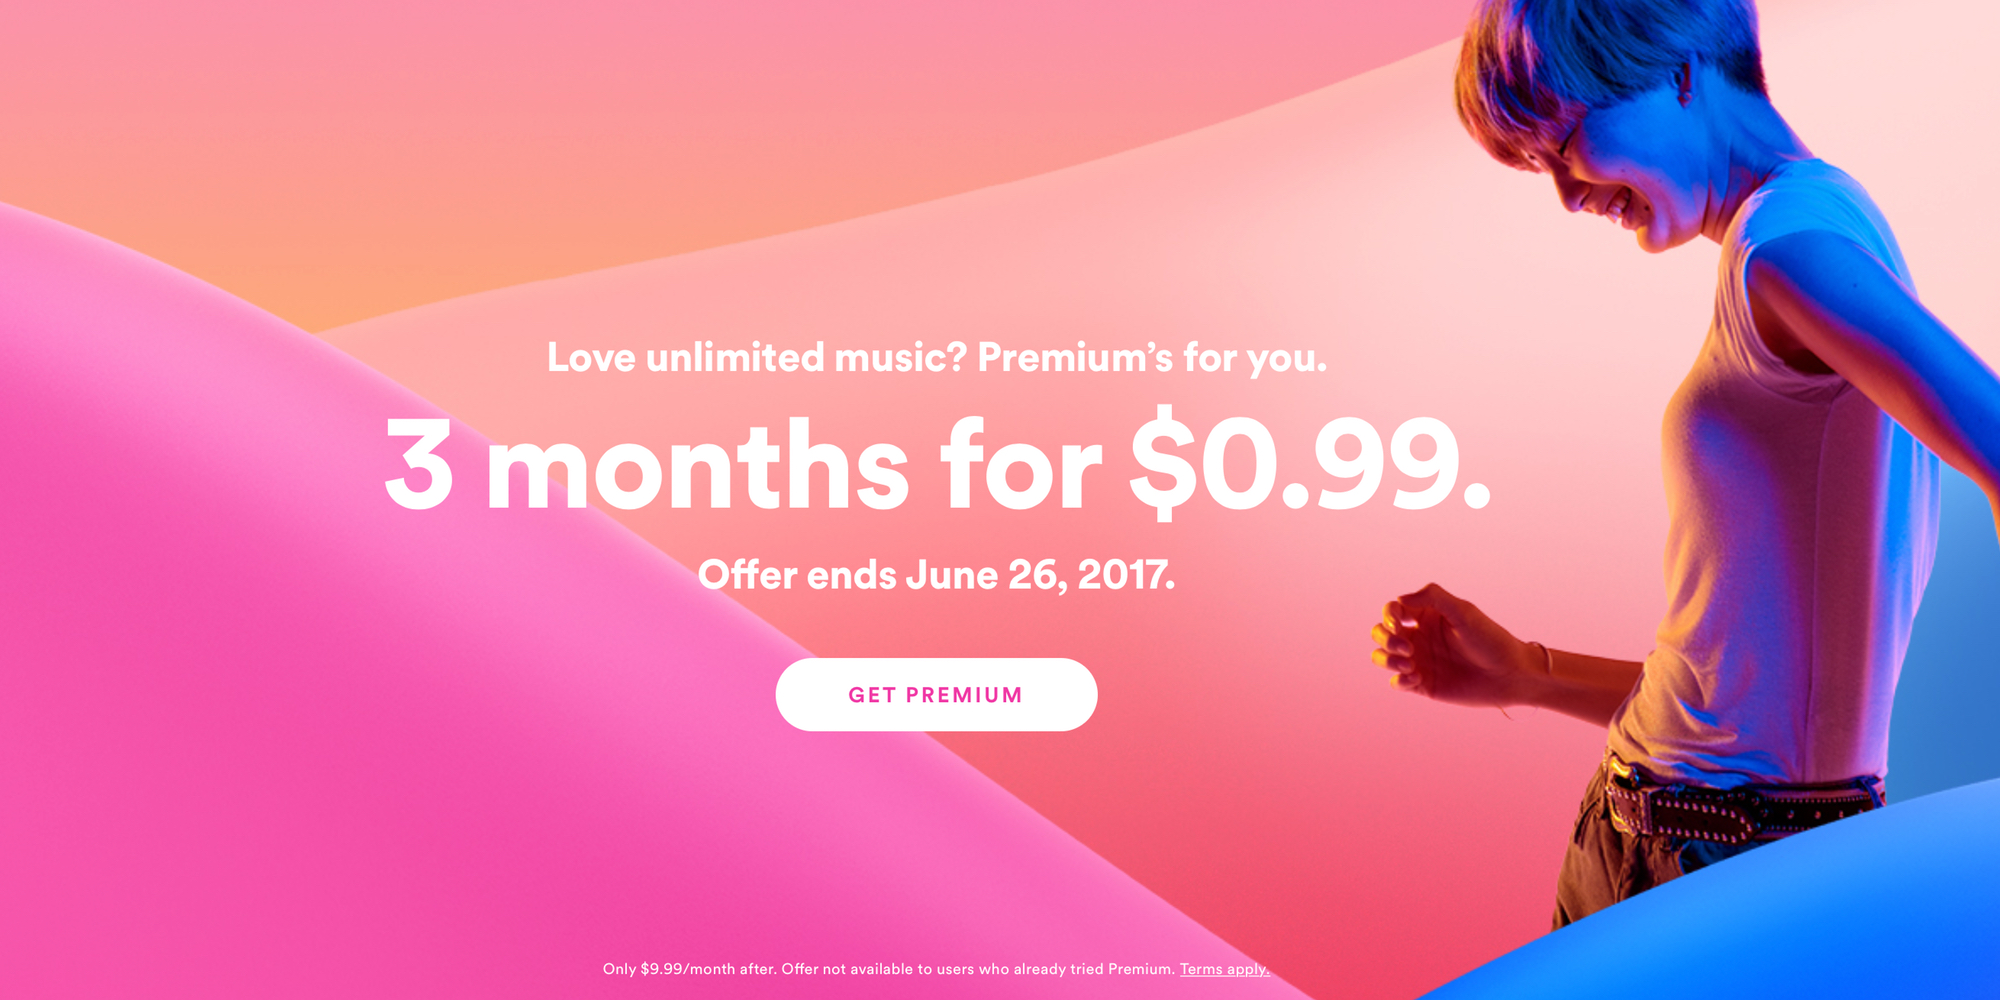 Spotify Premium 3month trial gets you unlimited music for 1 (30 value)